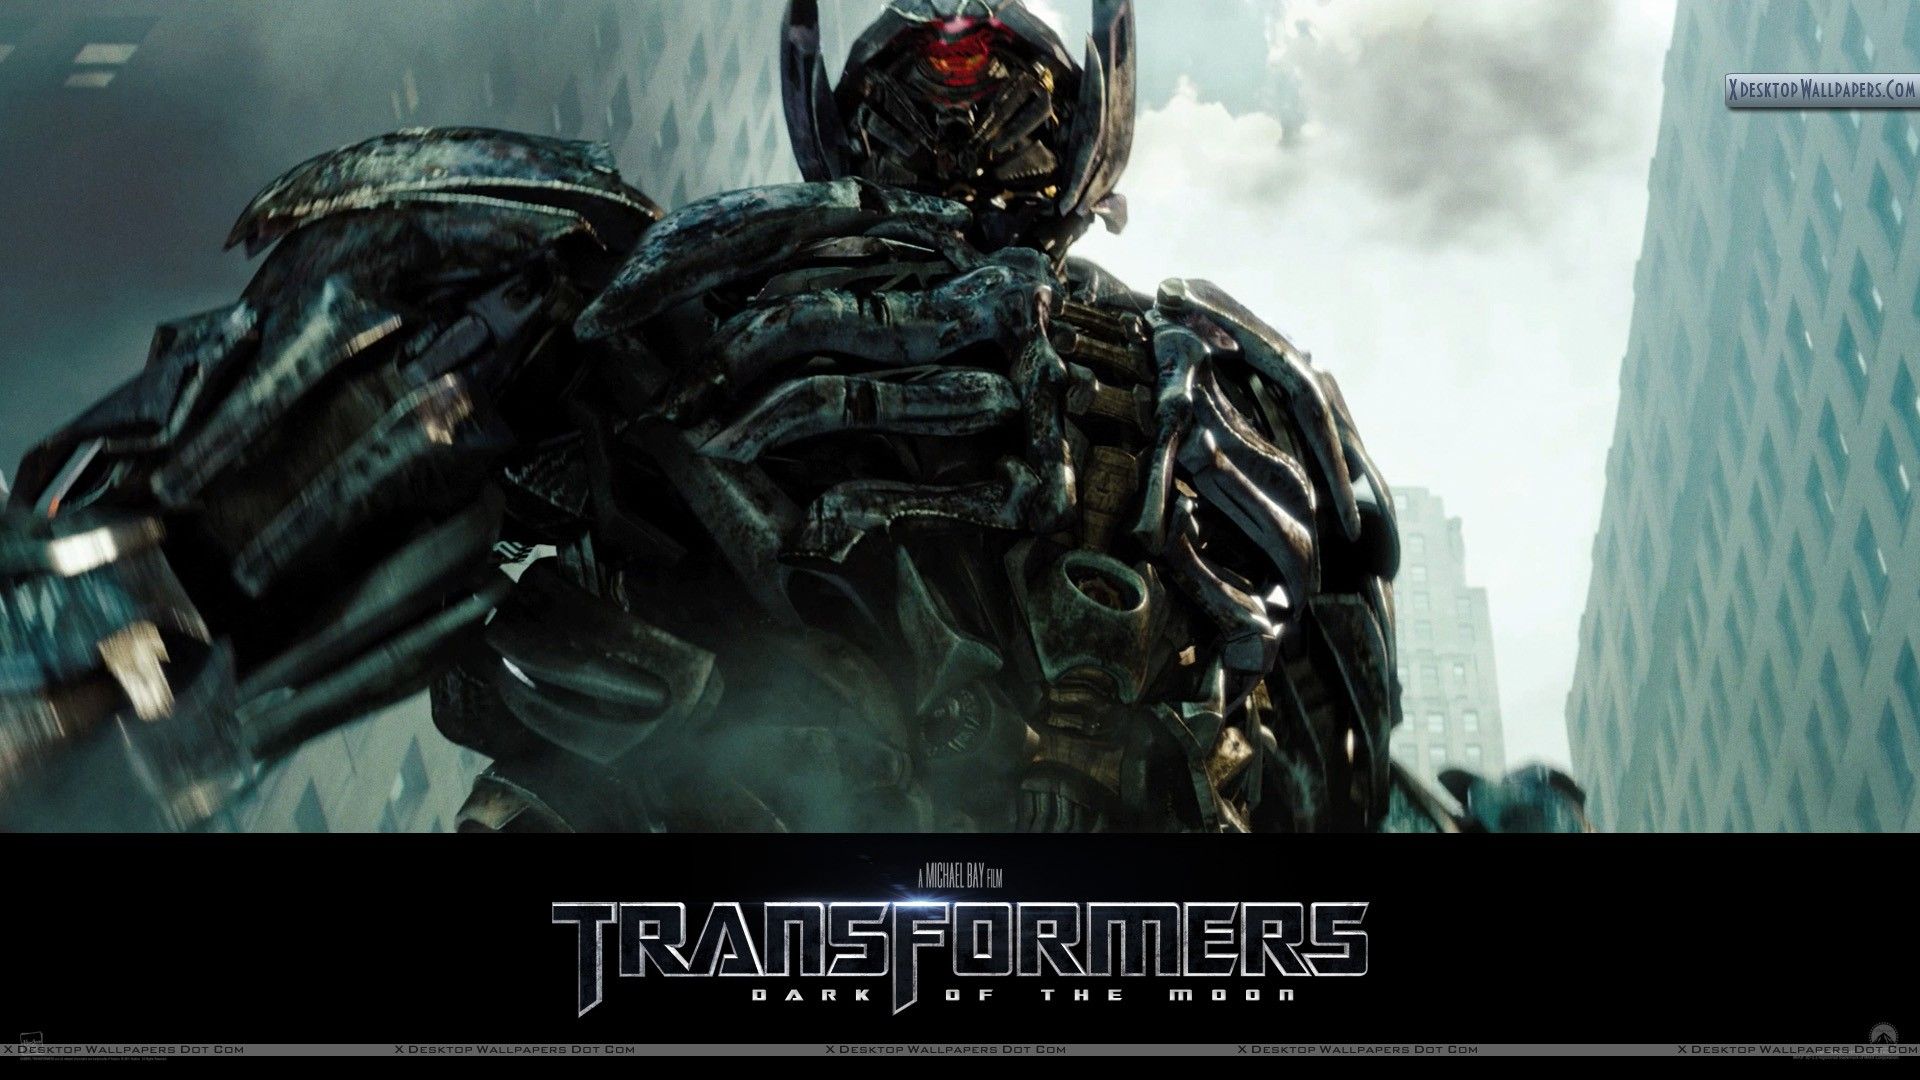 Transformers 3 – Dark of the Moon Wallpapers, Photos & Images in HD